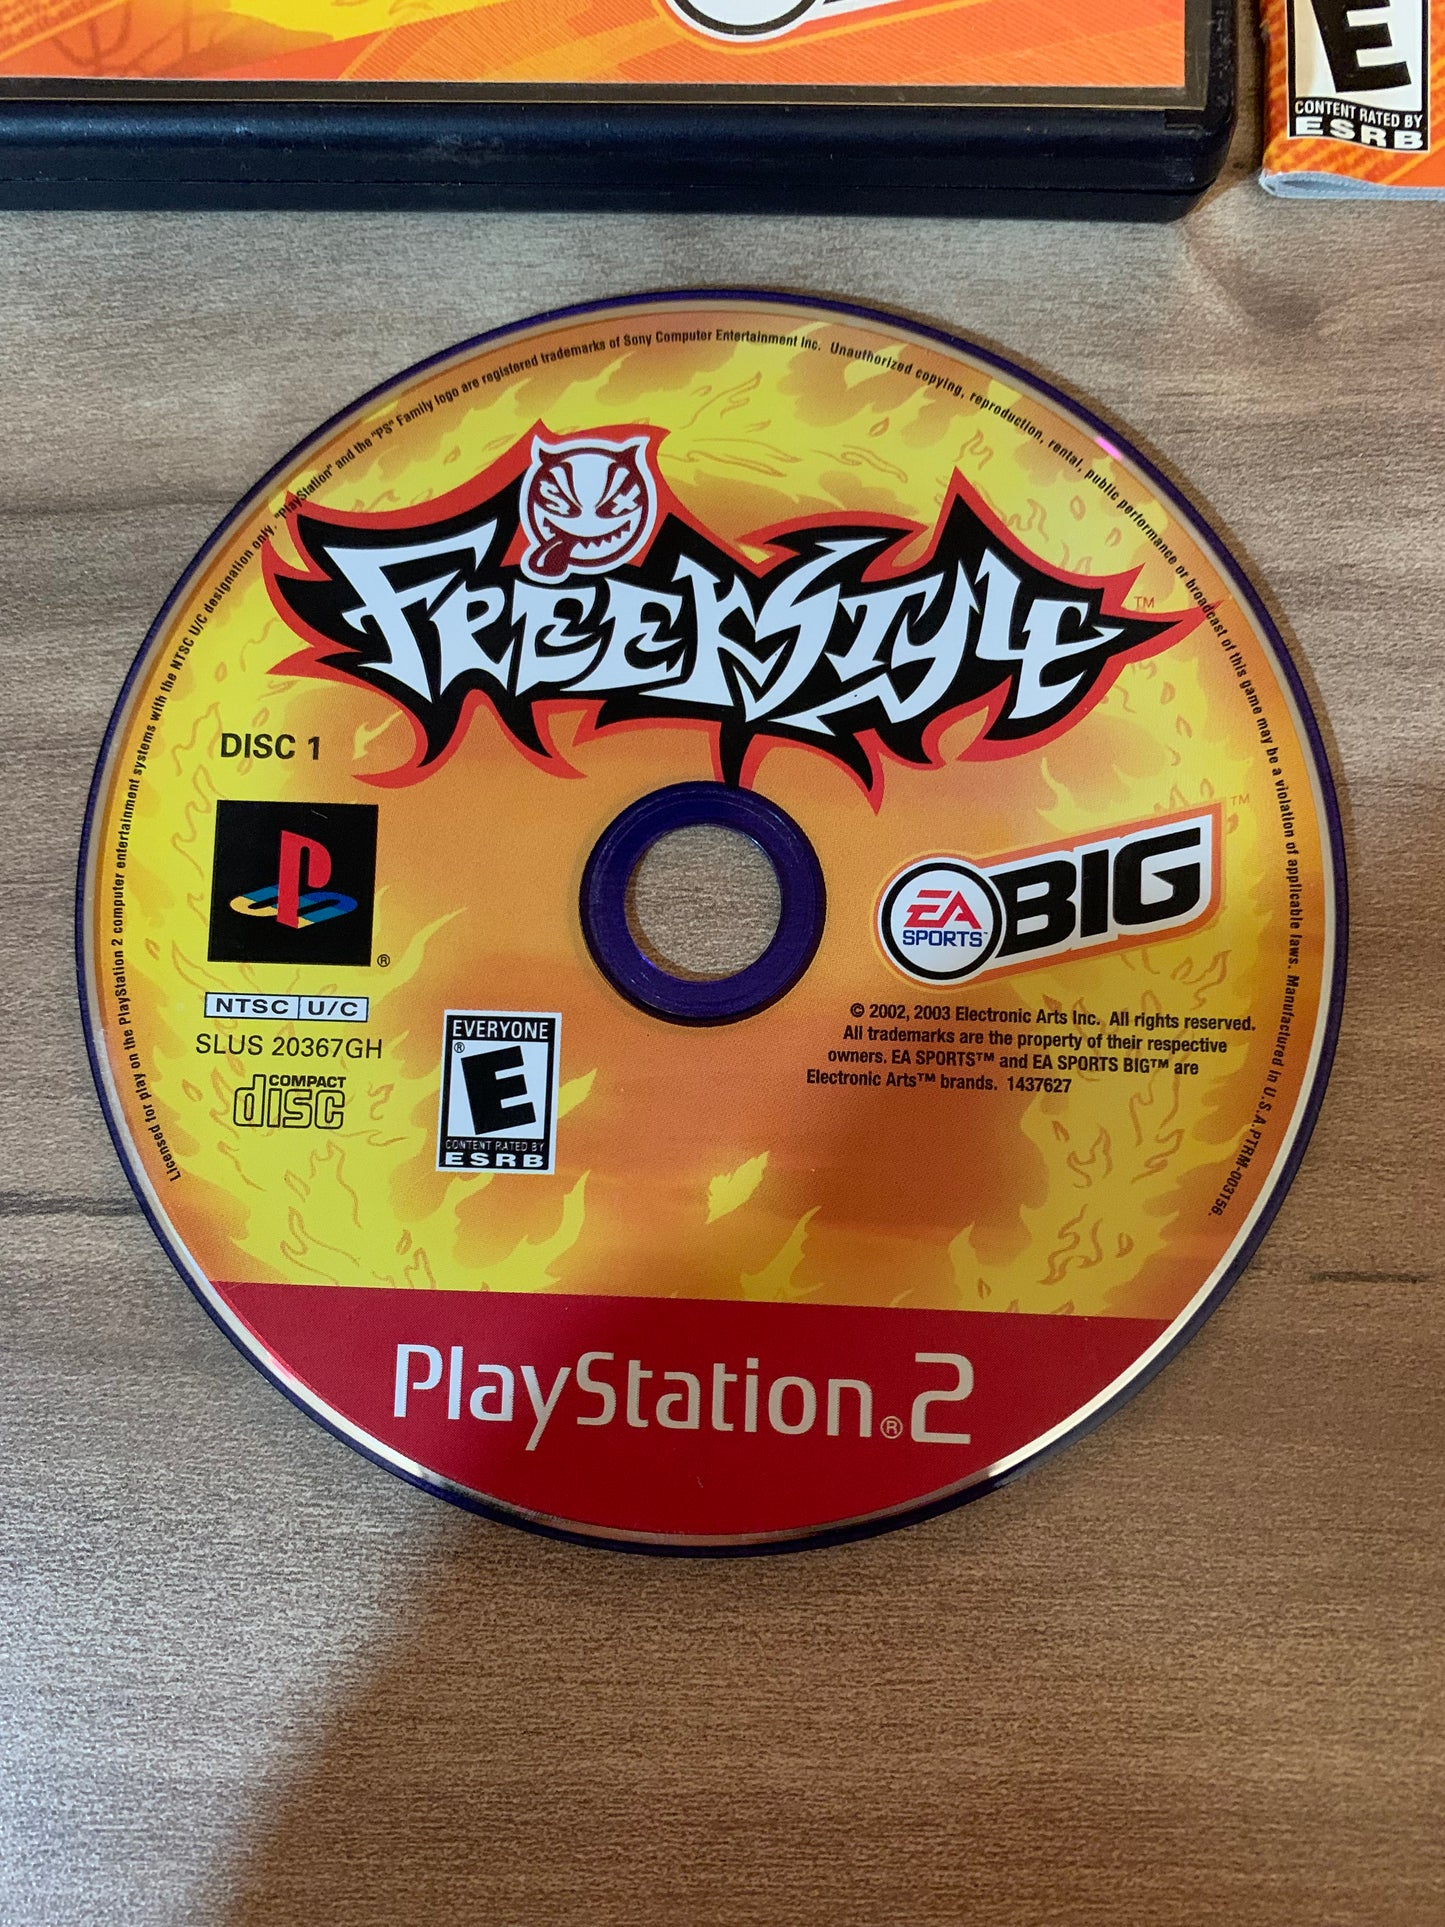 SONY PLAYSTATiON 2 [PS2] | FREESTYLE